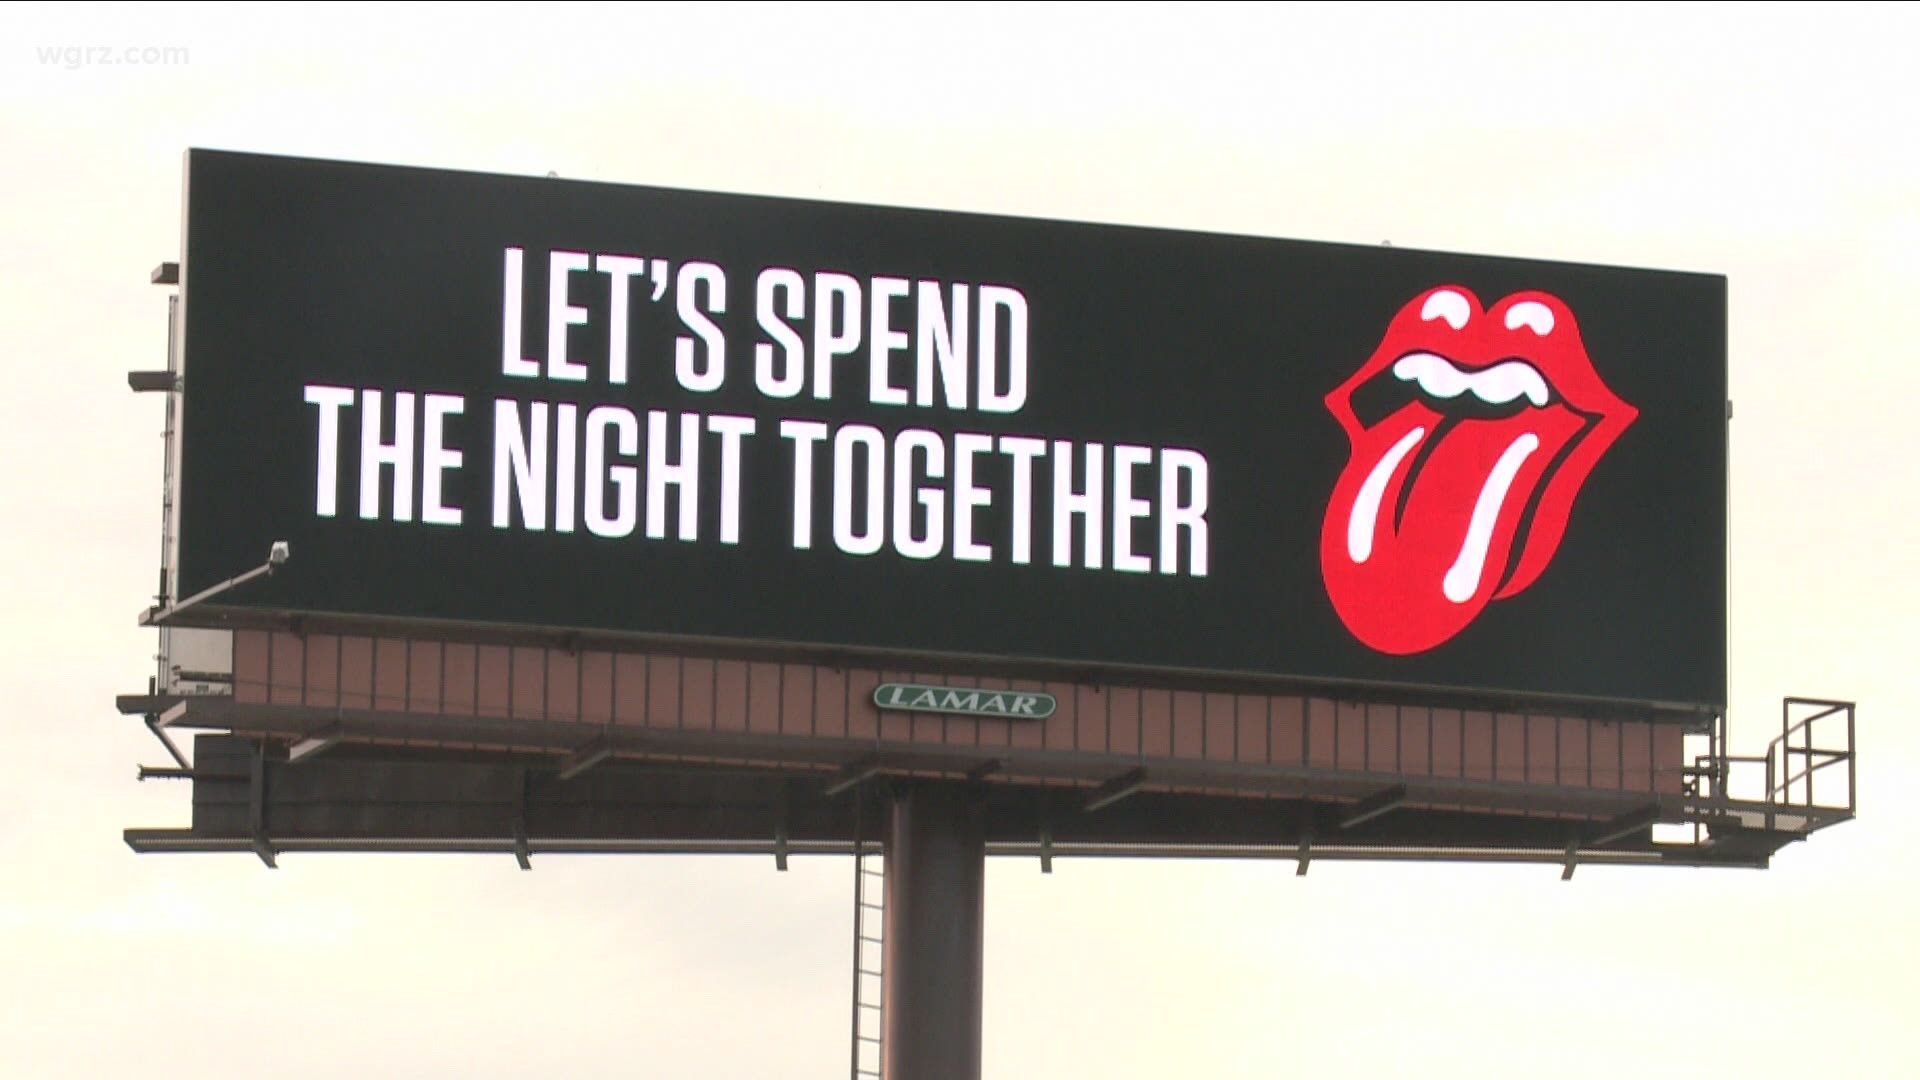 Rolling Stones going back on tour, not coming Buffalo wgrz.com